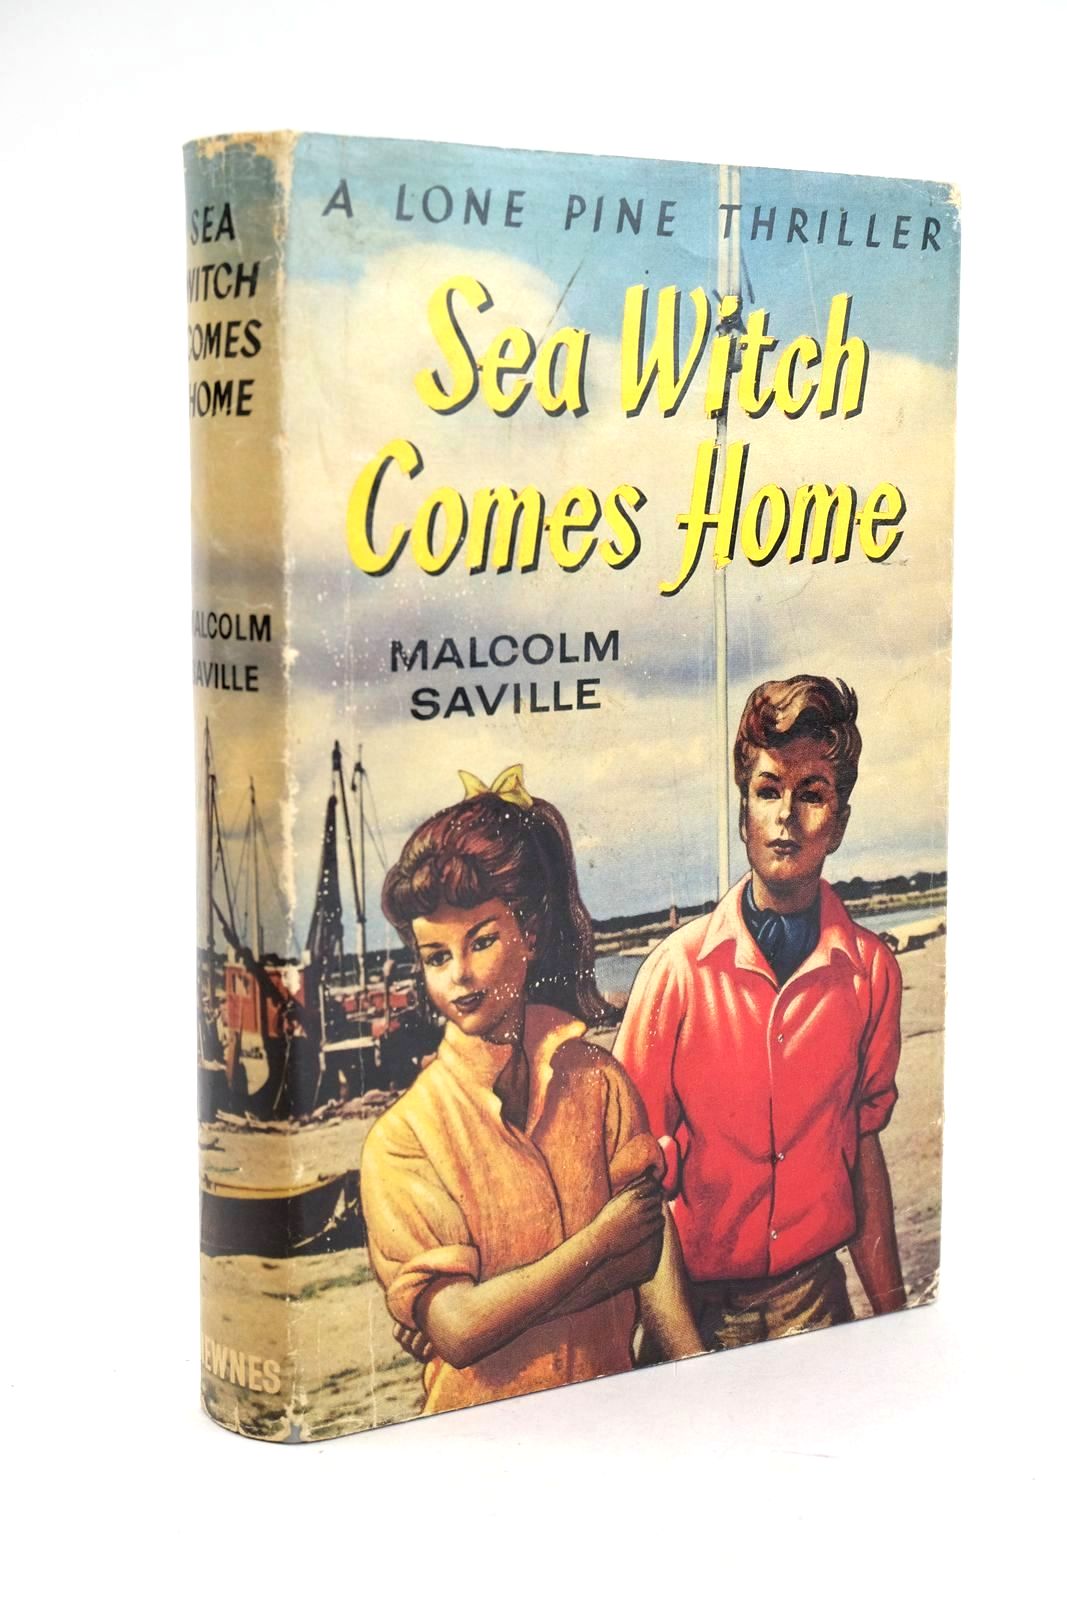 Photo of SEA WITCH COMES HOME written by Saville, Malcolm published by George Newnes Ltd. (STOCK CODE: 1324581)  for sale by Stella & Rose's Books